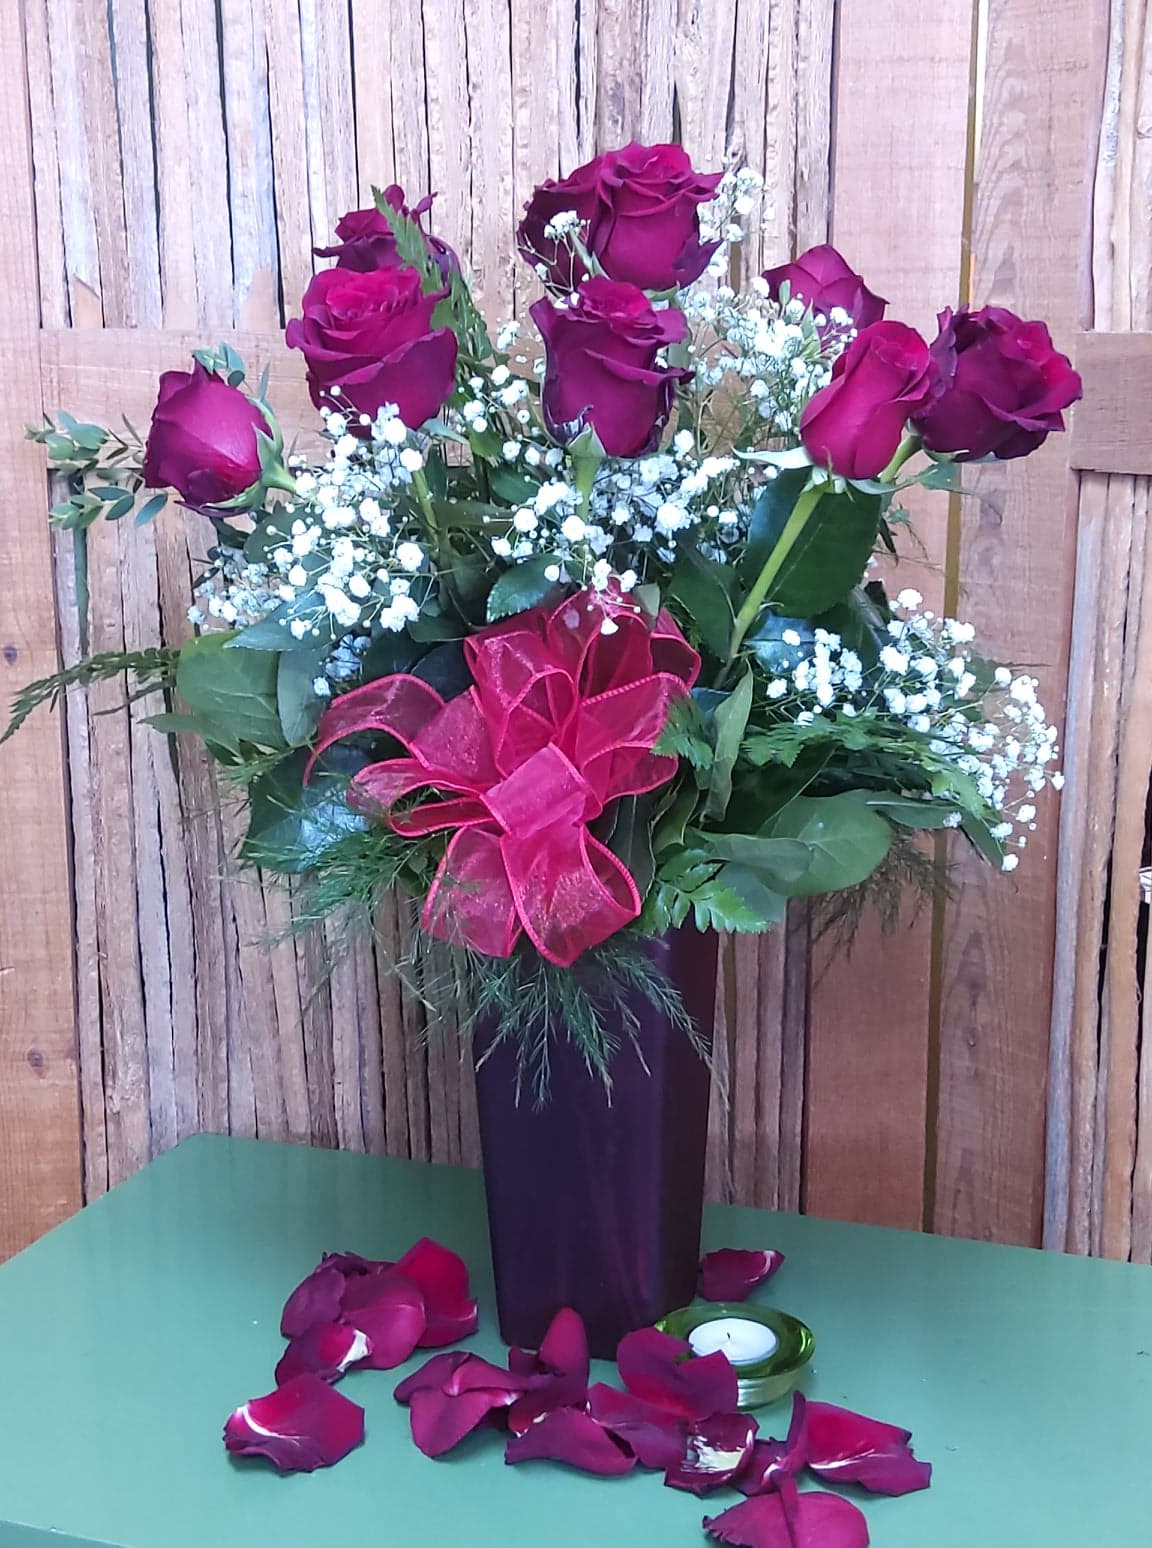 A Classic Dozen - A dozen romantic red roses are always perfect, always savored. Let the roses do the talking! &lt;3 